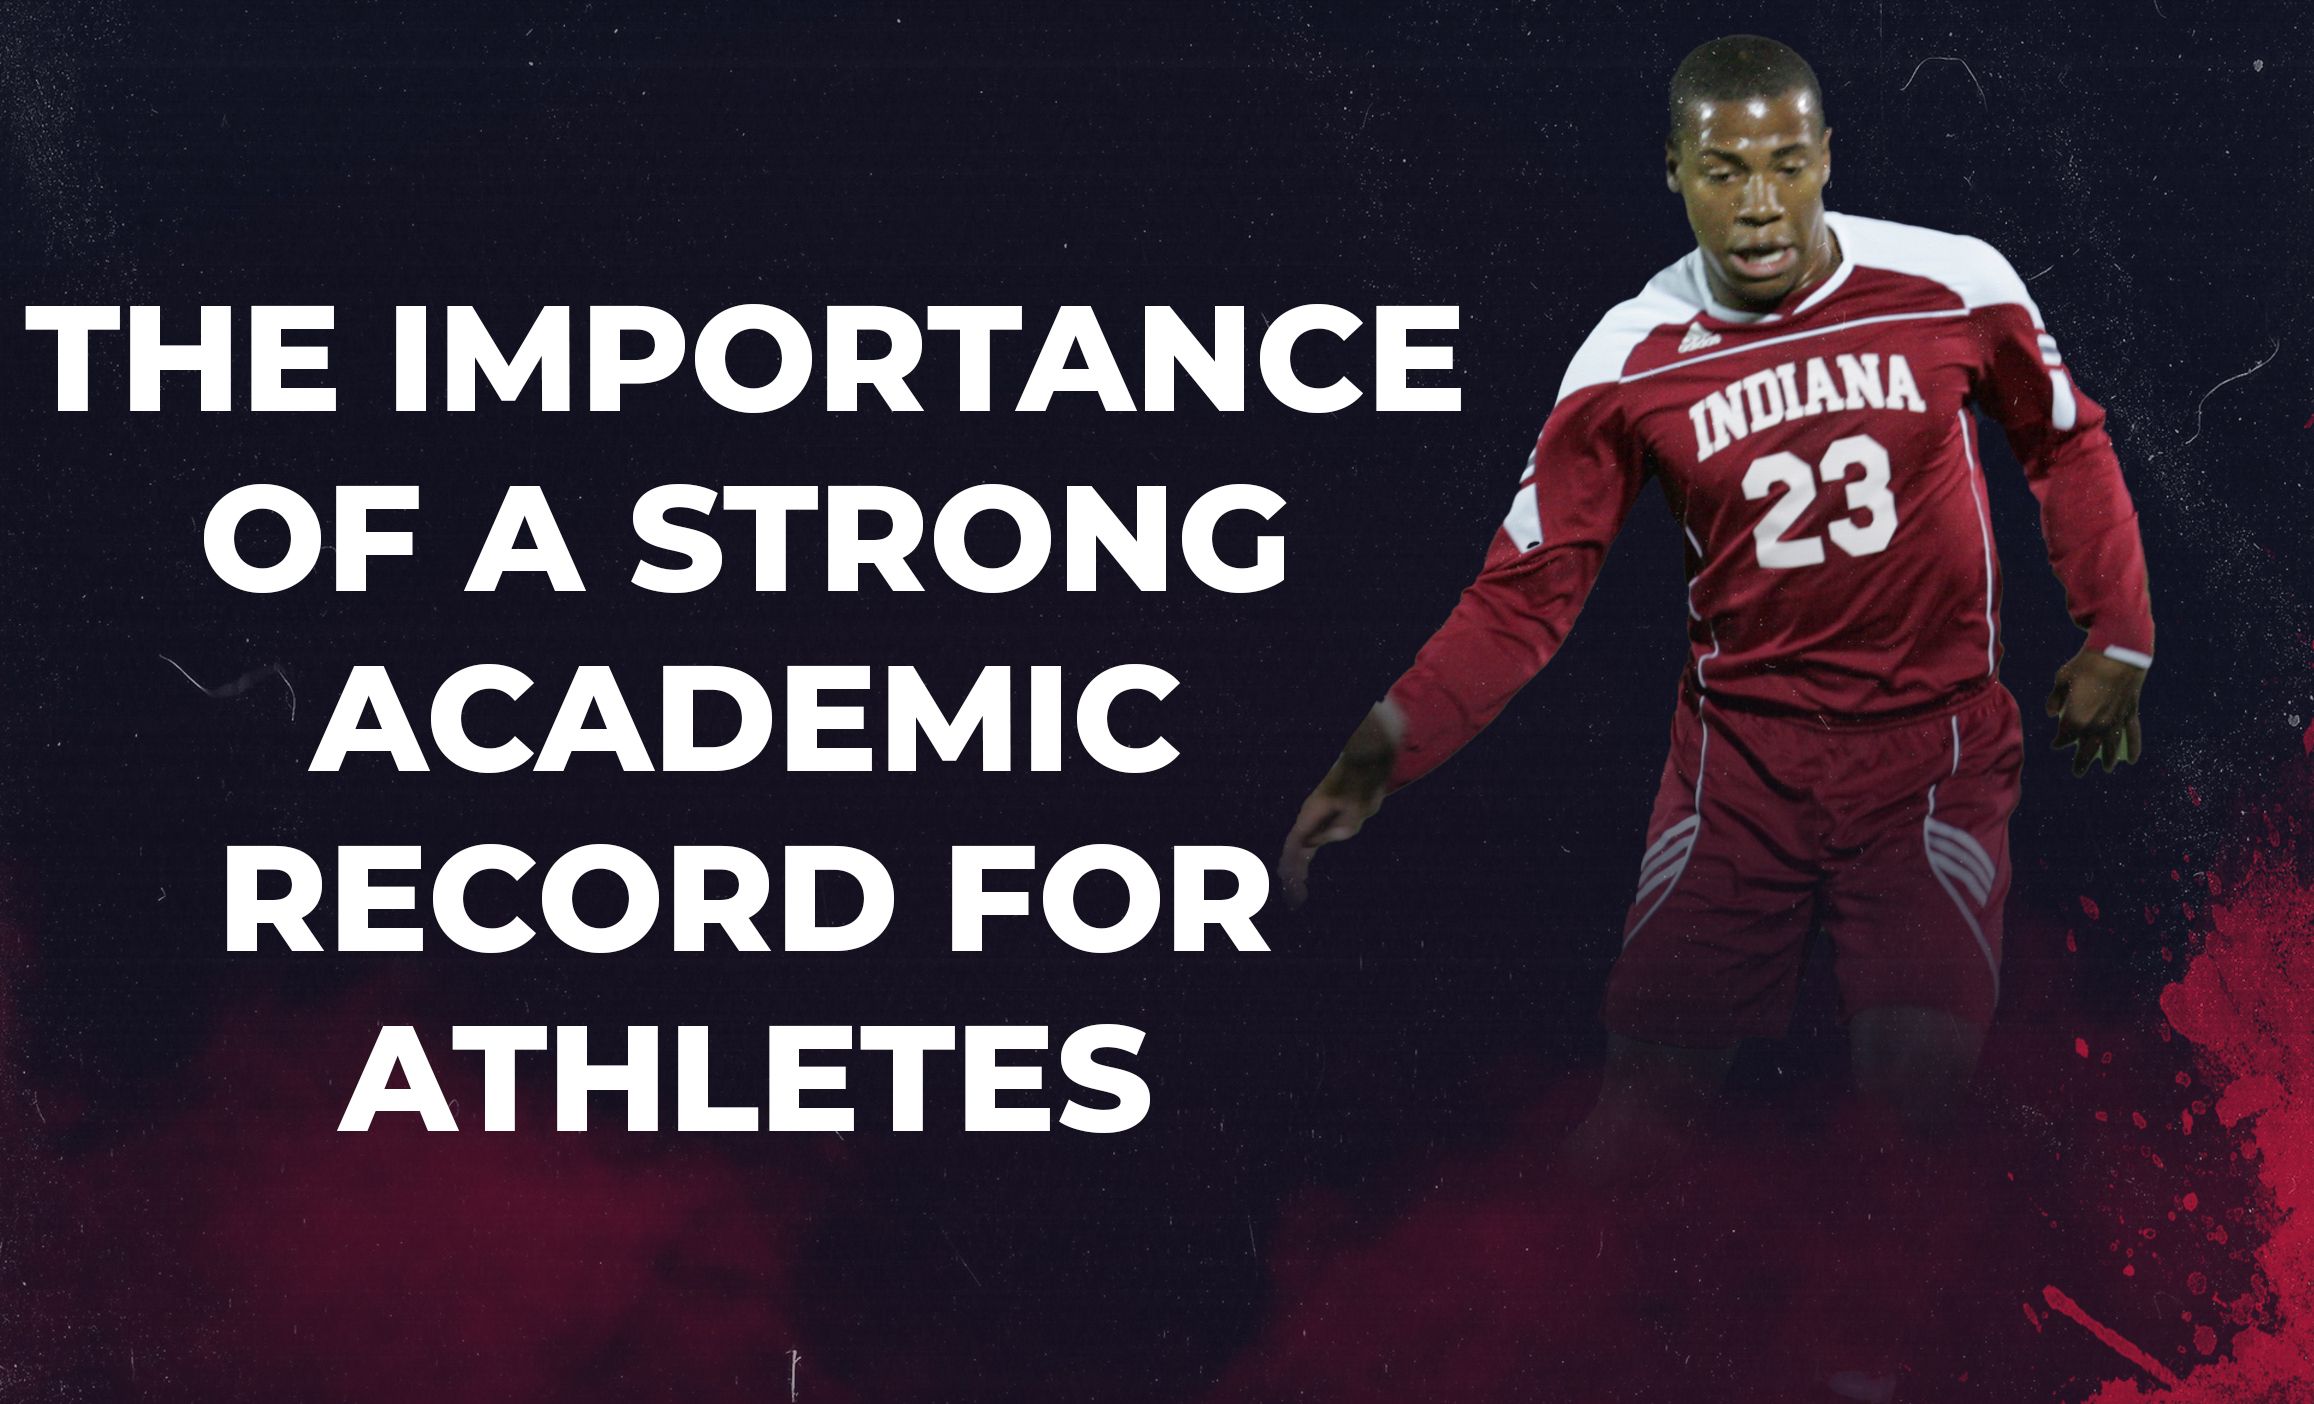 The importance of a strong academic record for athletes seeking scholarships